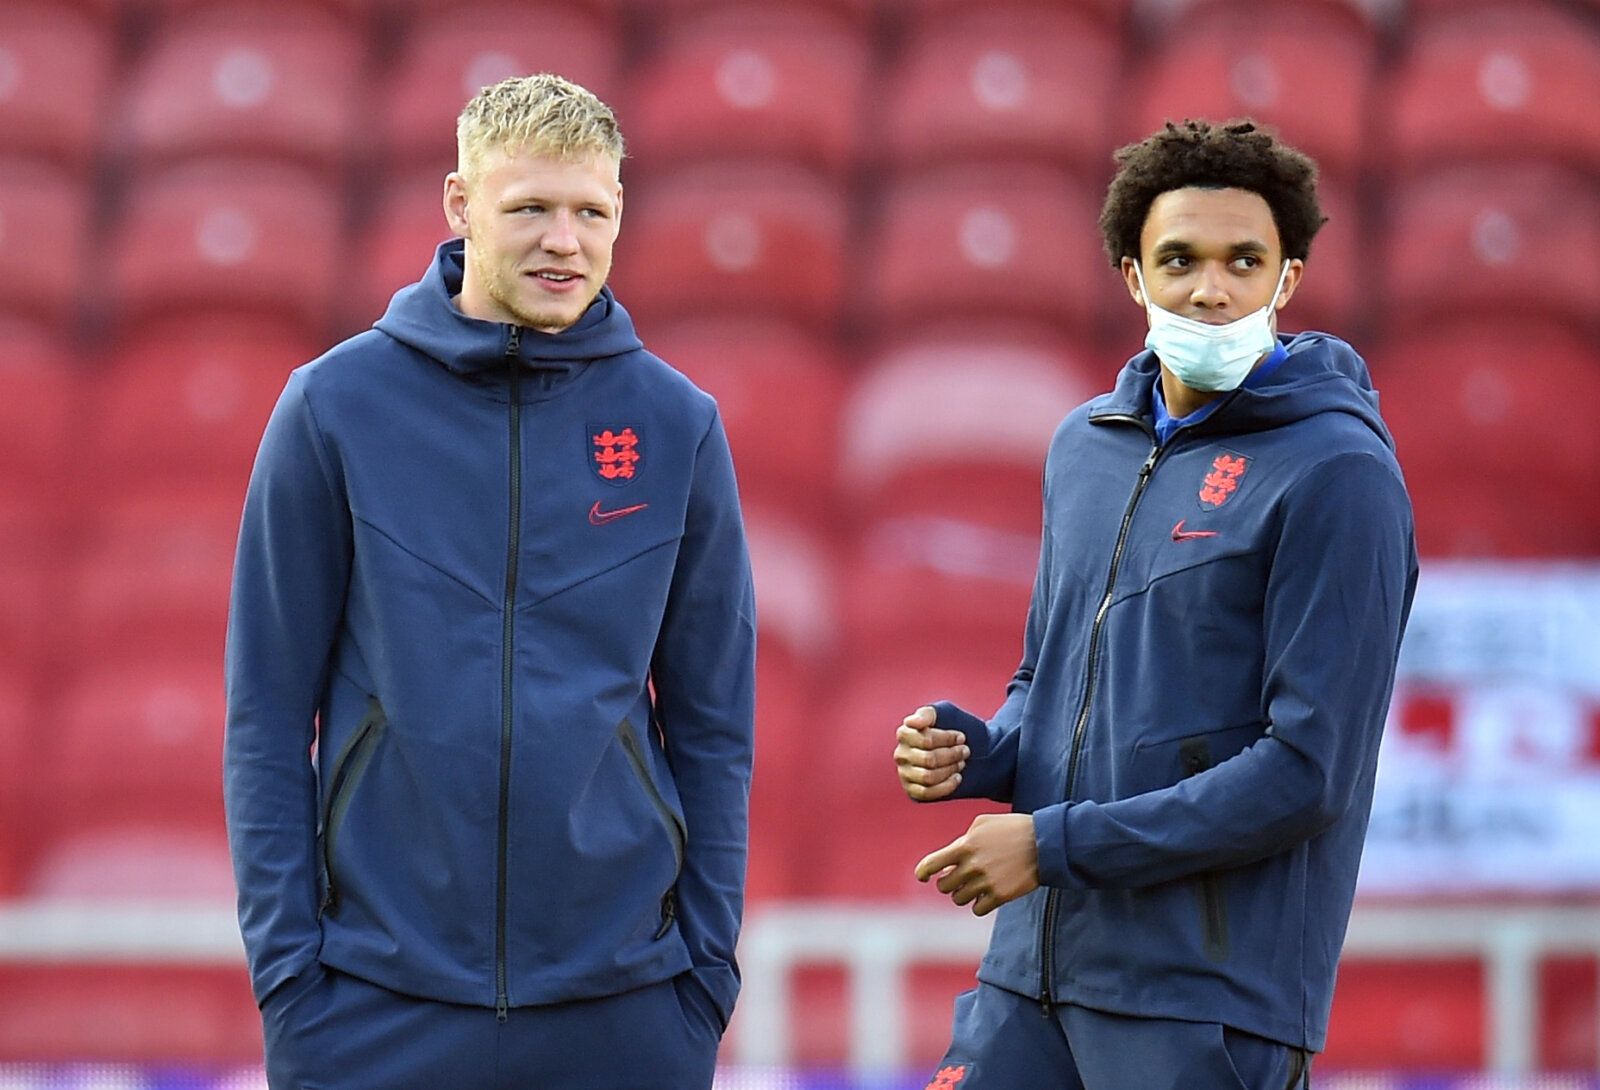 Soccer Football - International Friendly - England v Austria - Riverside Stadium, Middlesbrough, Britain - June 2, 2021 England's Aaron Ramsdale and Trent Alexander-Arnold before the match Pool via REUTERS/Peter Powell